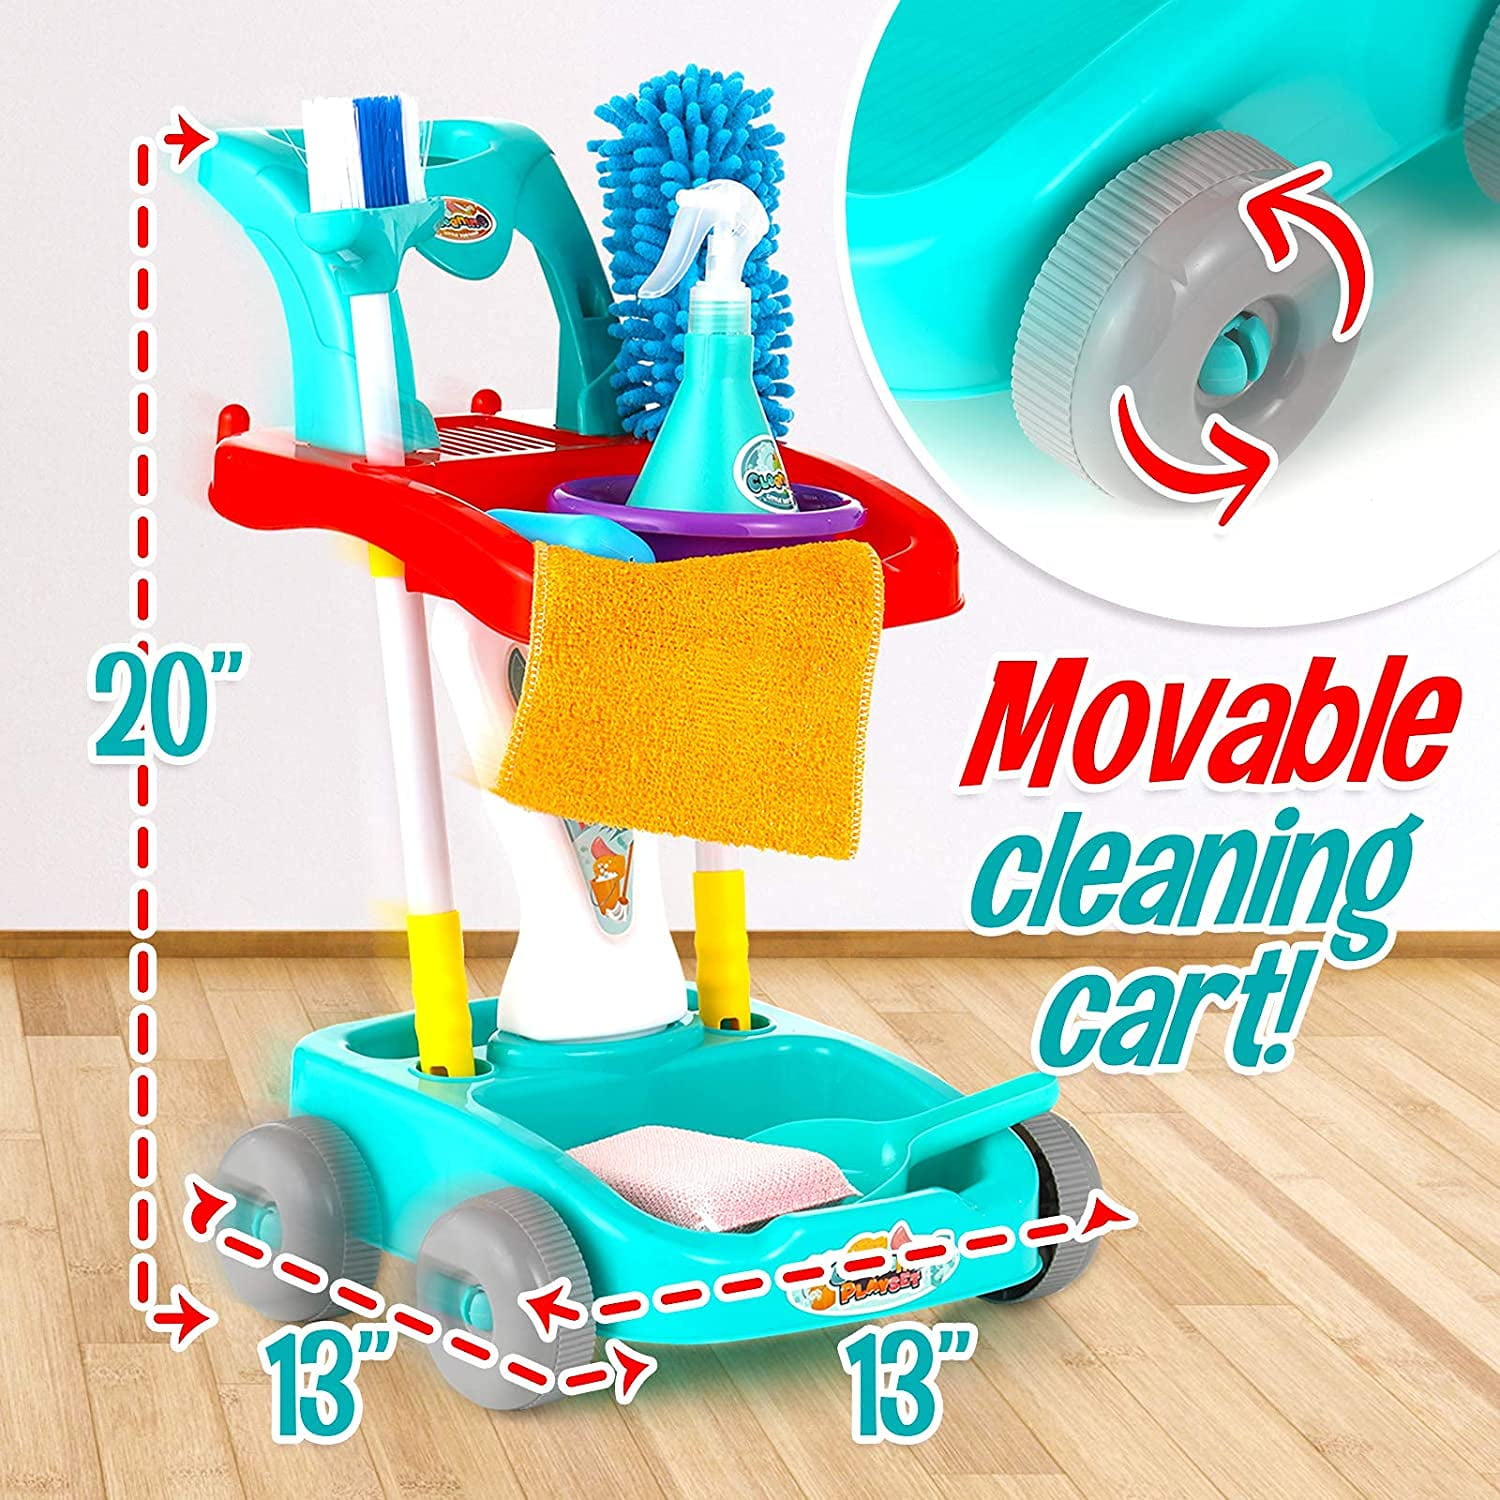 deAO Kids Cleaning Set 12 Pcs Pretend Play Detachable Housekeeping Cart with Broom,Dust Pan,Spray Bottle Children House Cleaning Tools Toys,Kids